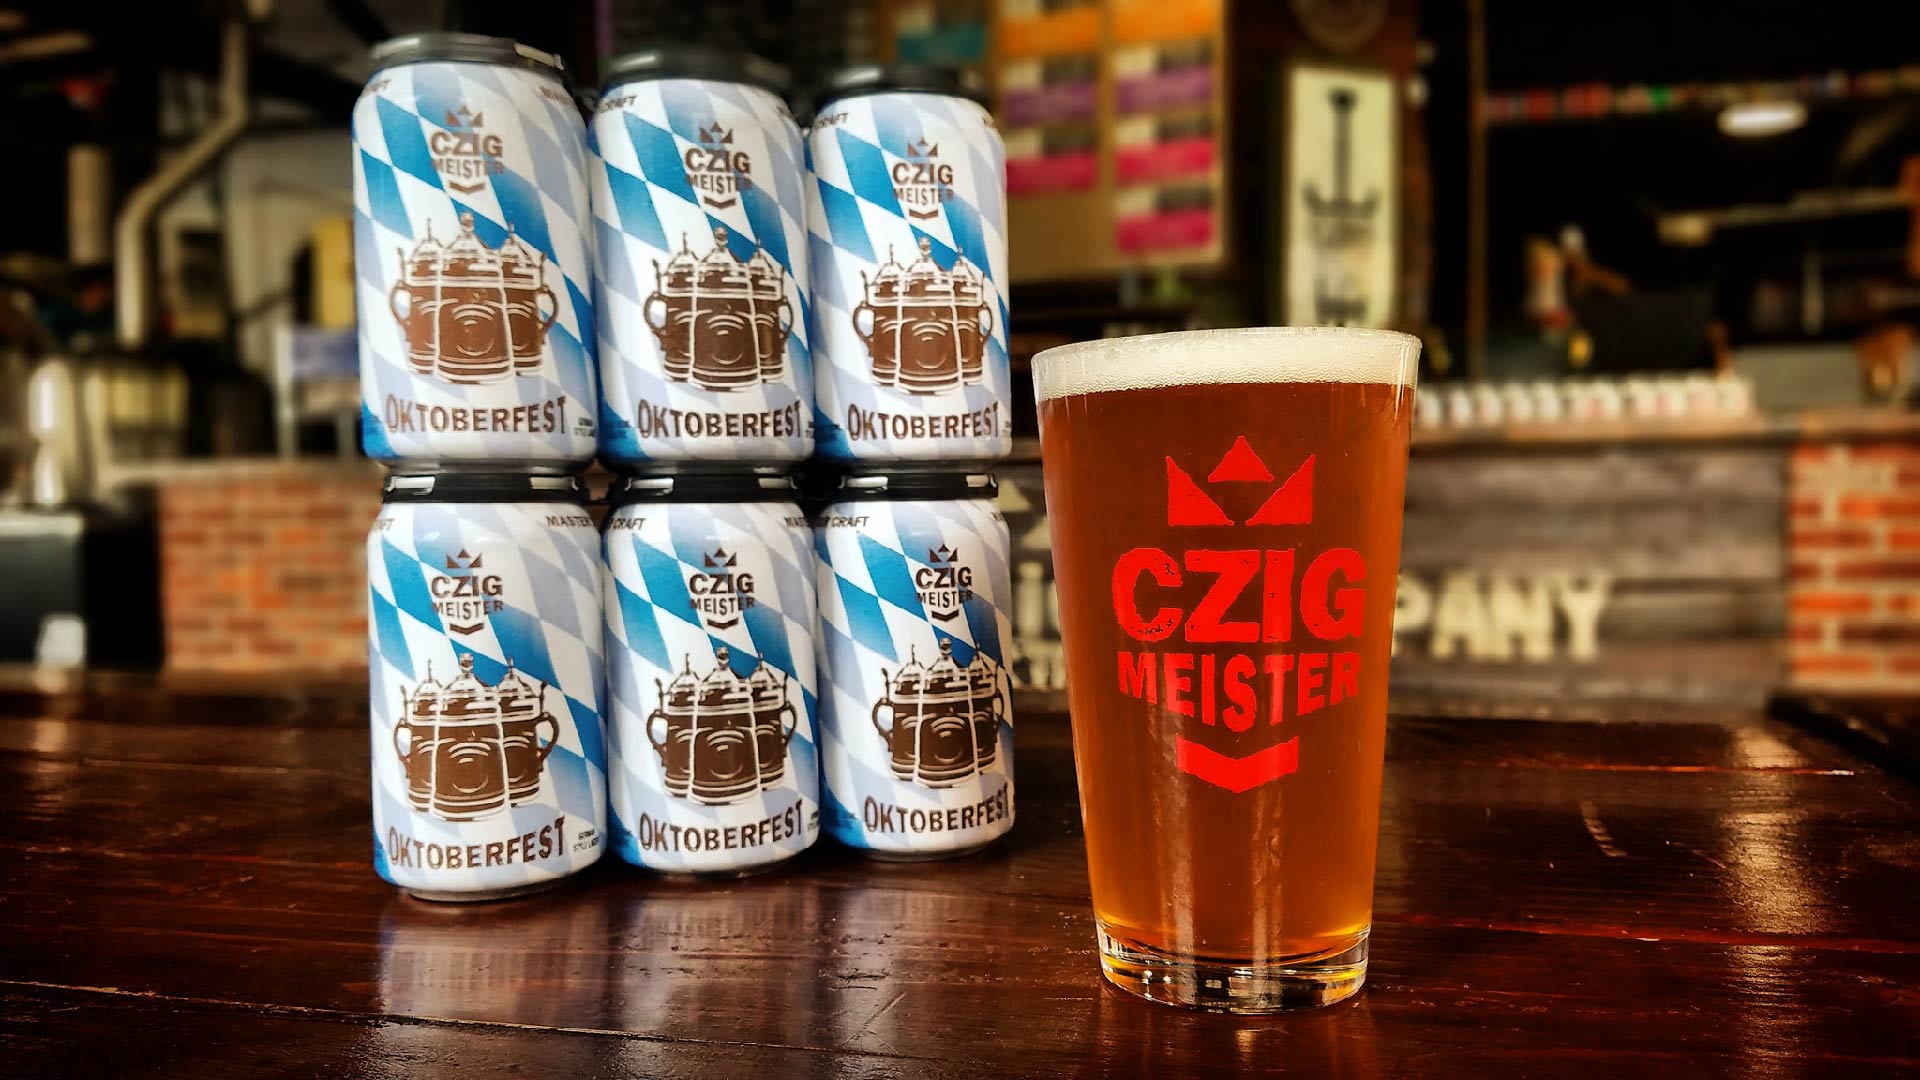 Cans of Oktoberfest at Czig Meister Brewing Company